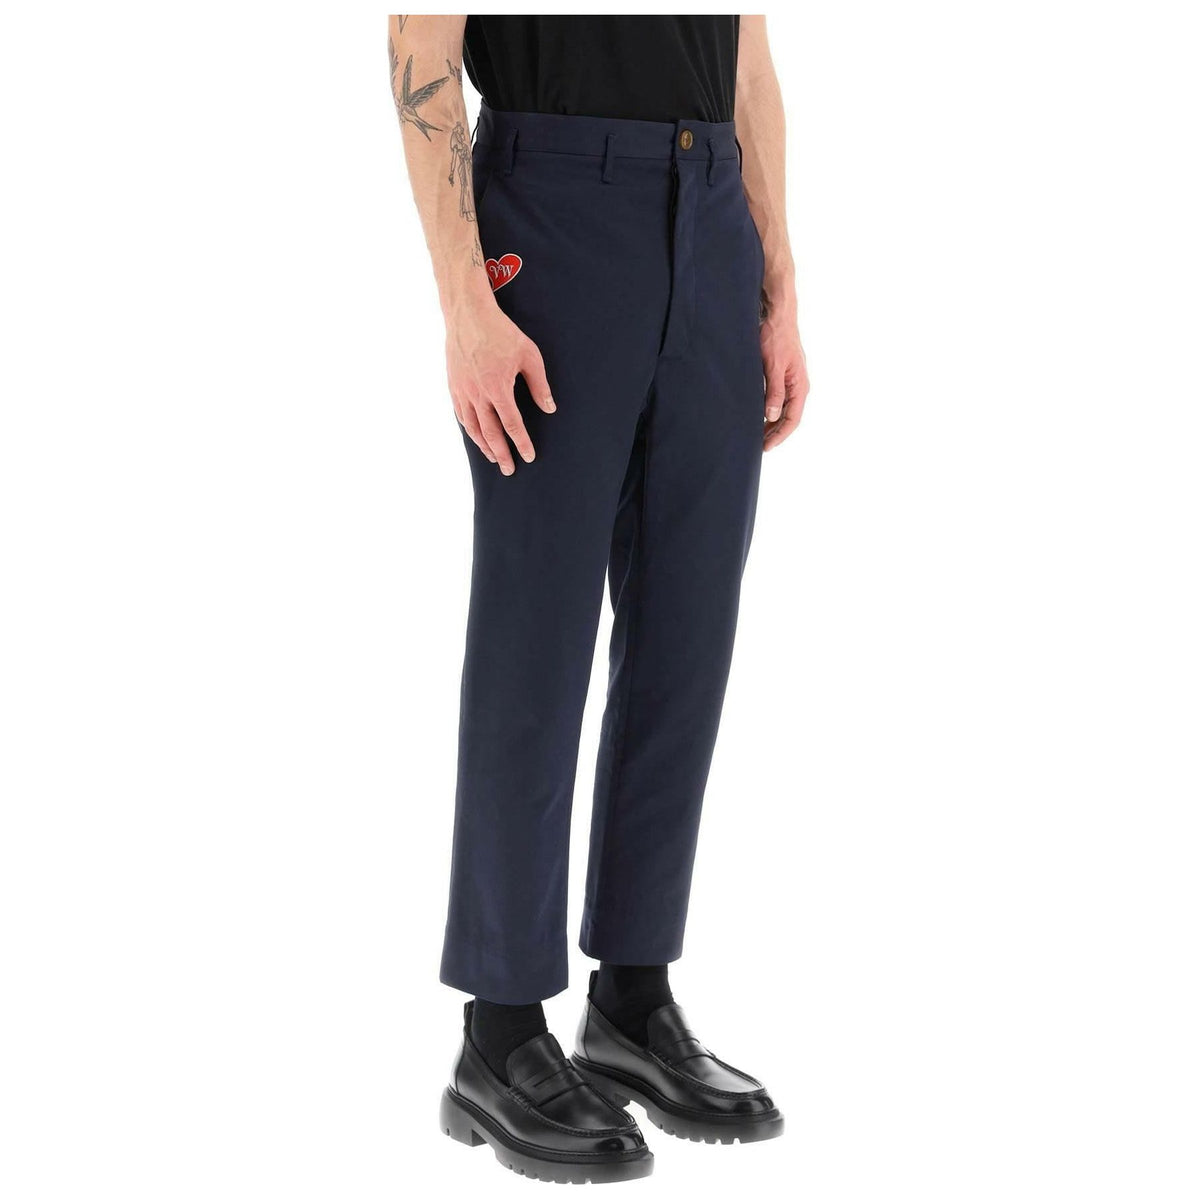 VIVIENNE WESTWOOD - Cropped Cruise Pants Featuring Embroidered Heart Shaped Logo - JOHN JULIA